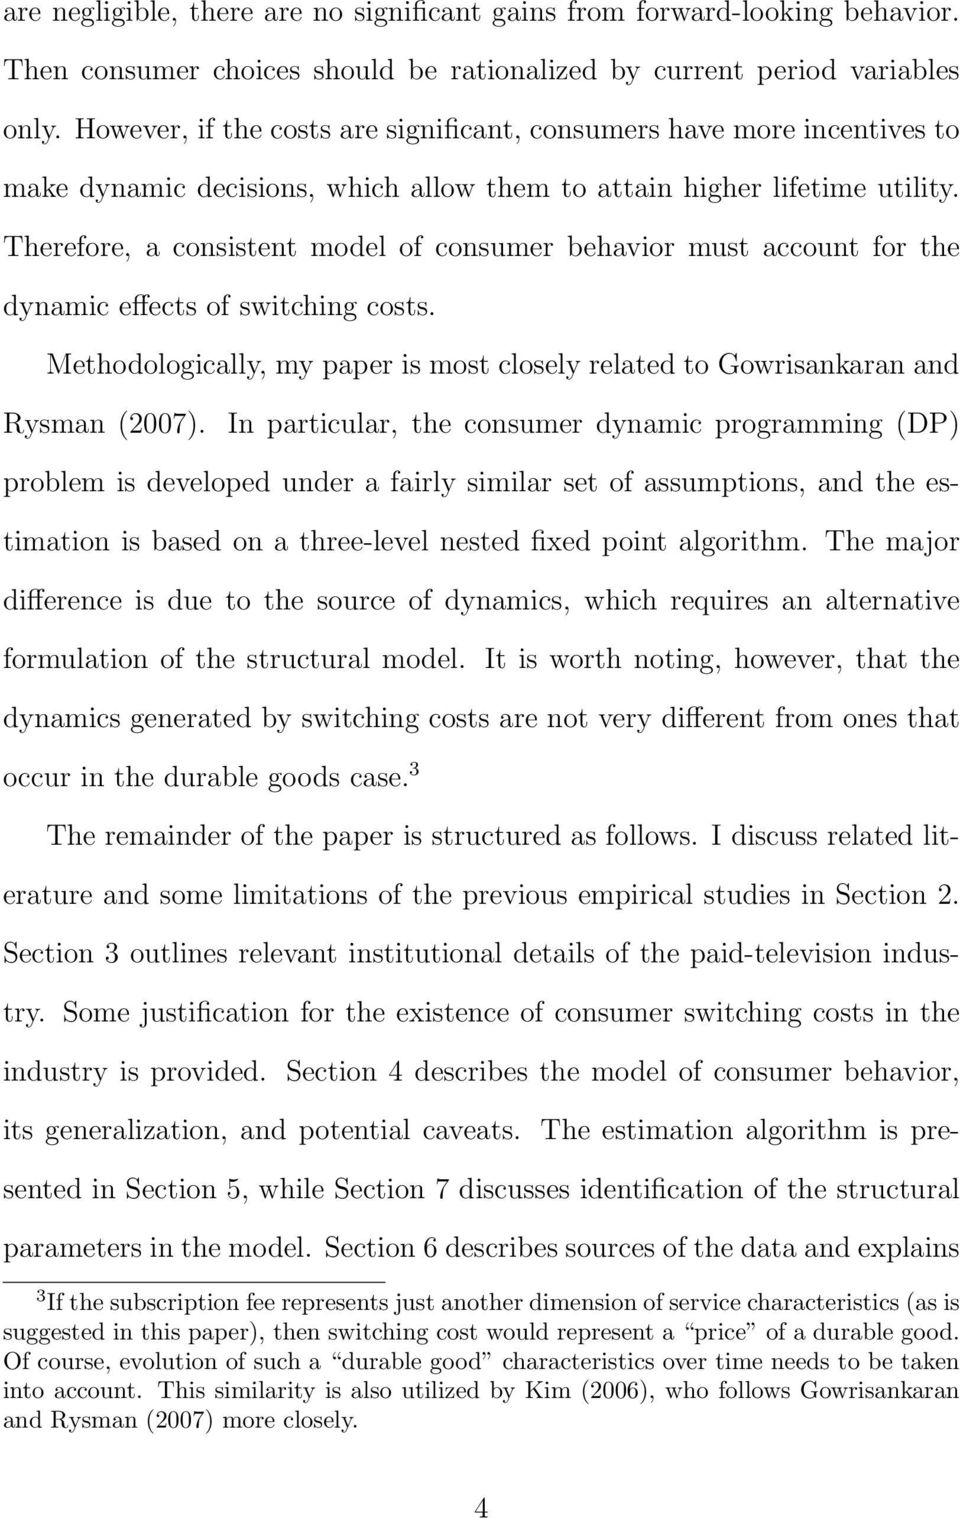 Therefore, a consistent model of consumer behavior must account for the dynamic effects of switching costs. Methodologically, my paper is most closely related to Gowrisankaran and Rysman (2007).